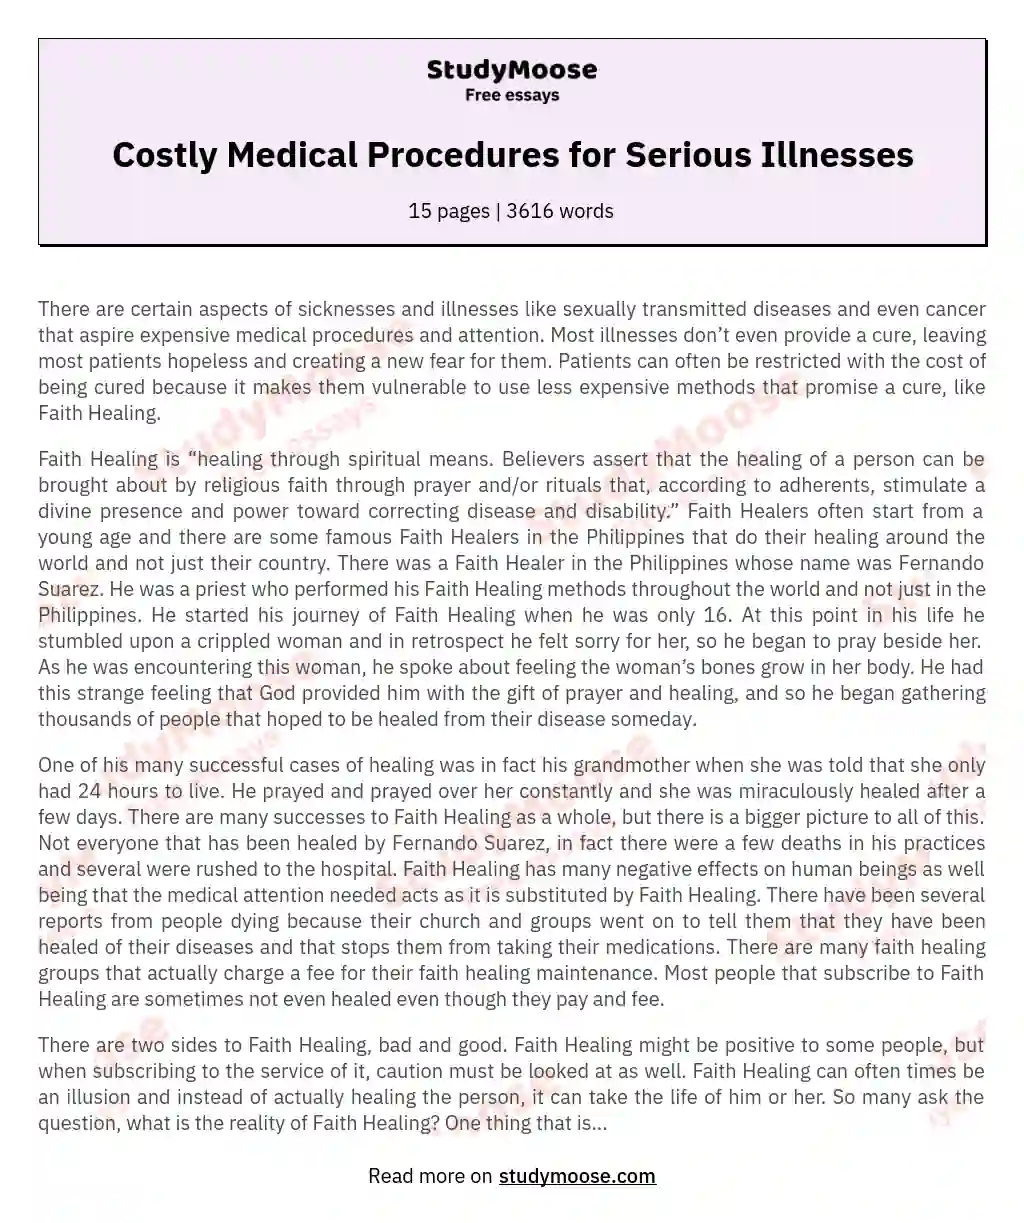 Costly Medical Procedures for Serious Illnesses